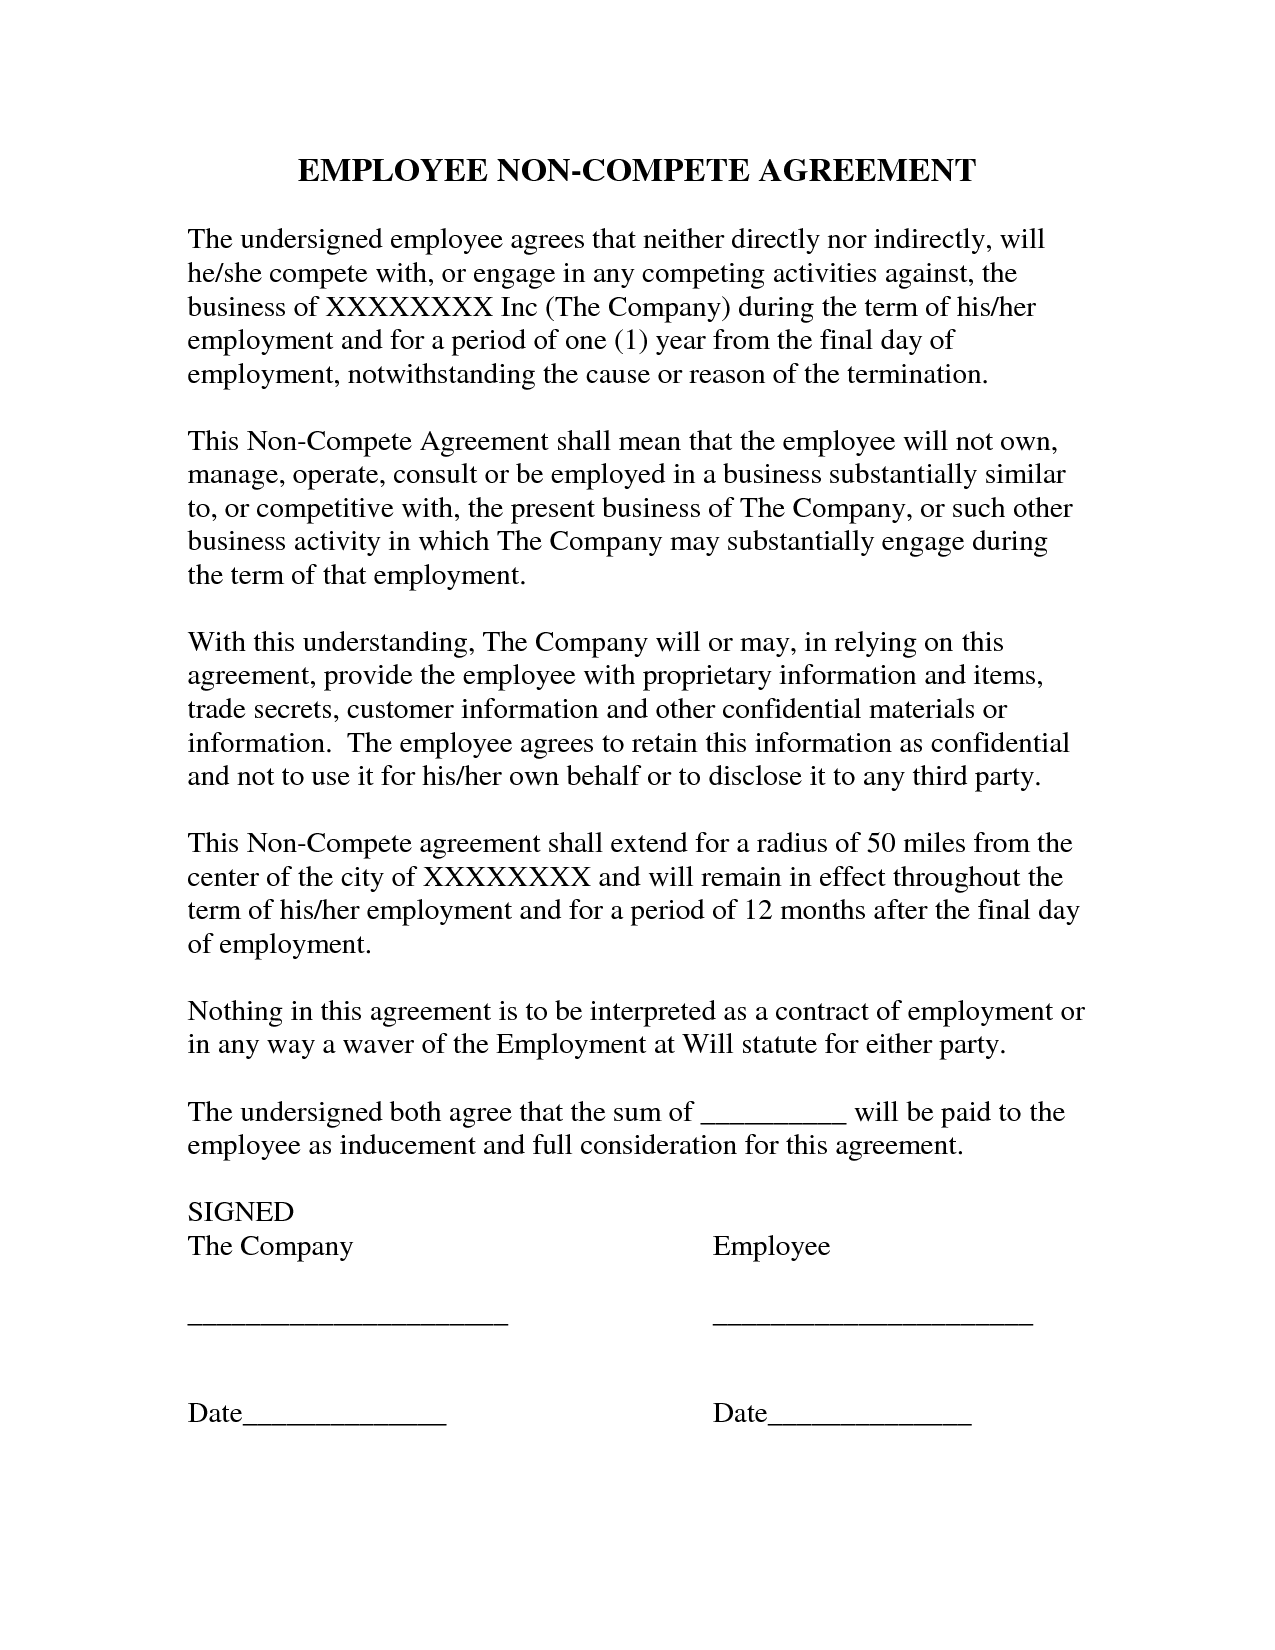 non-compete-agreement-sample-form-free-printable-documents